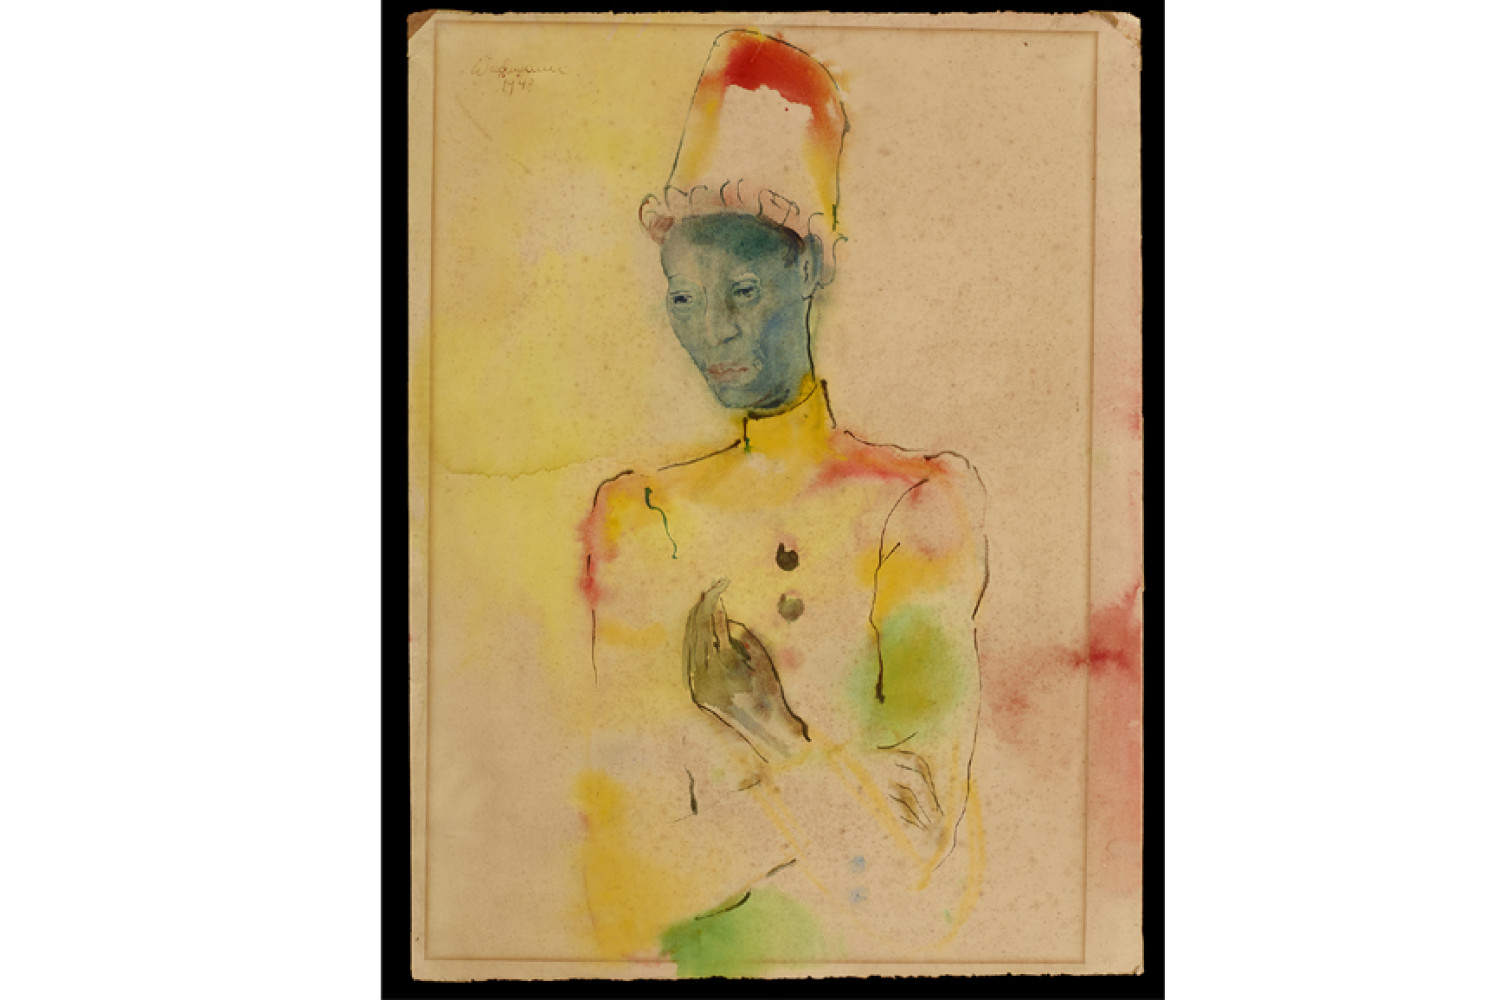 Untitled (Figure at Carnival), 1948, by Guillermo Wiedemann (Colombian, 1905 - 1969); Watercolor on paper; 31 1/2 x 23 5/8 inches. Courtesy of the Lowe Art Museum, University of Miami. 